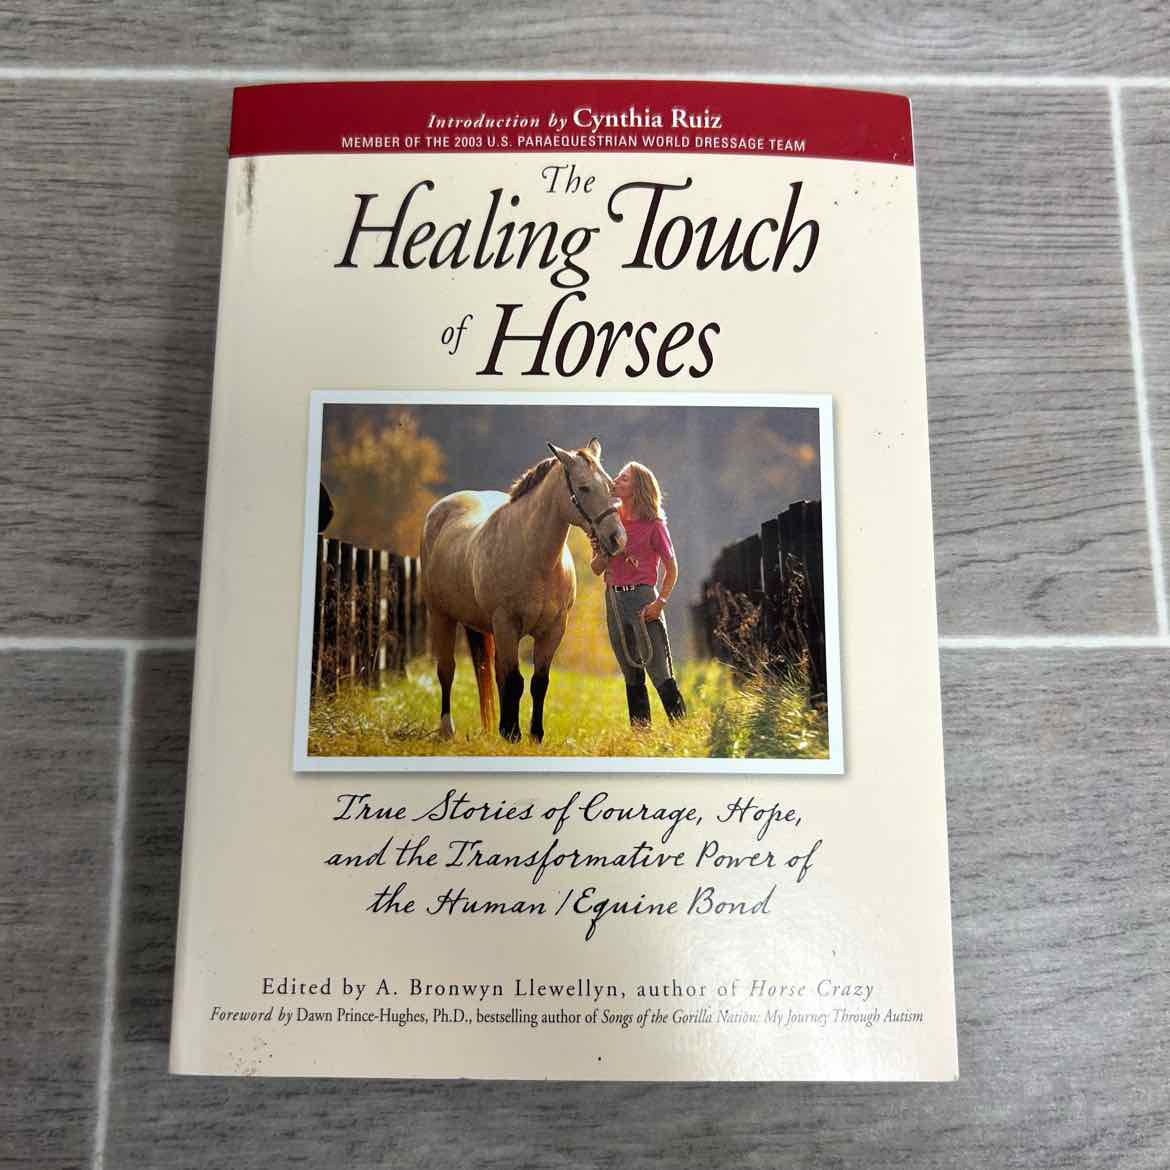 The Healing Touch of Horses by Cynthia Ruiz